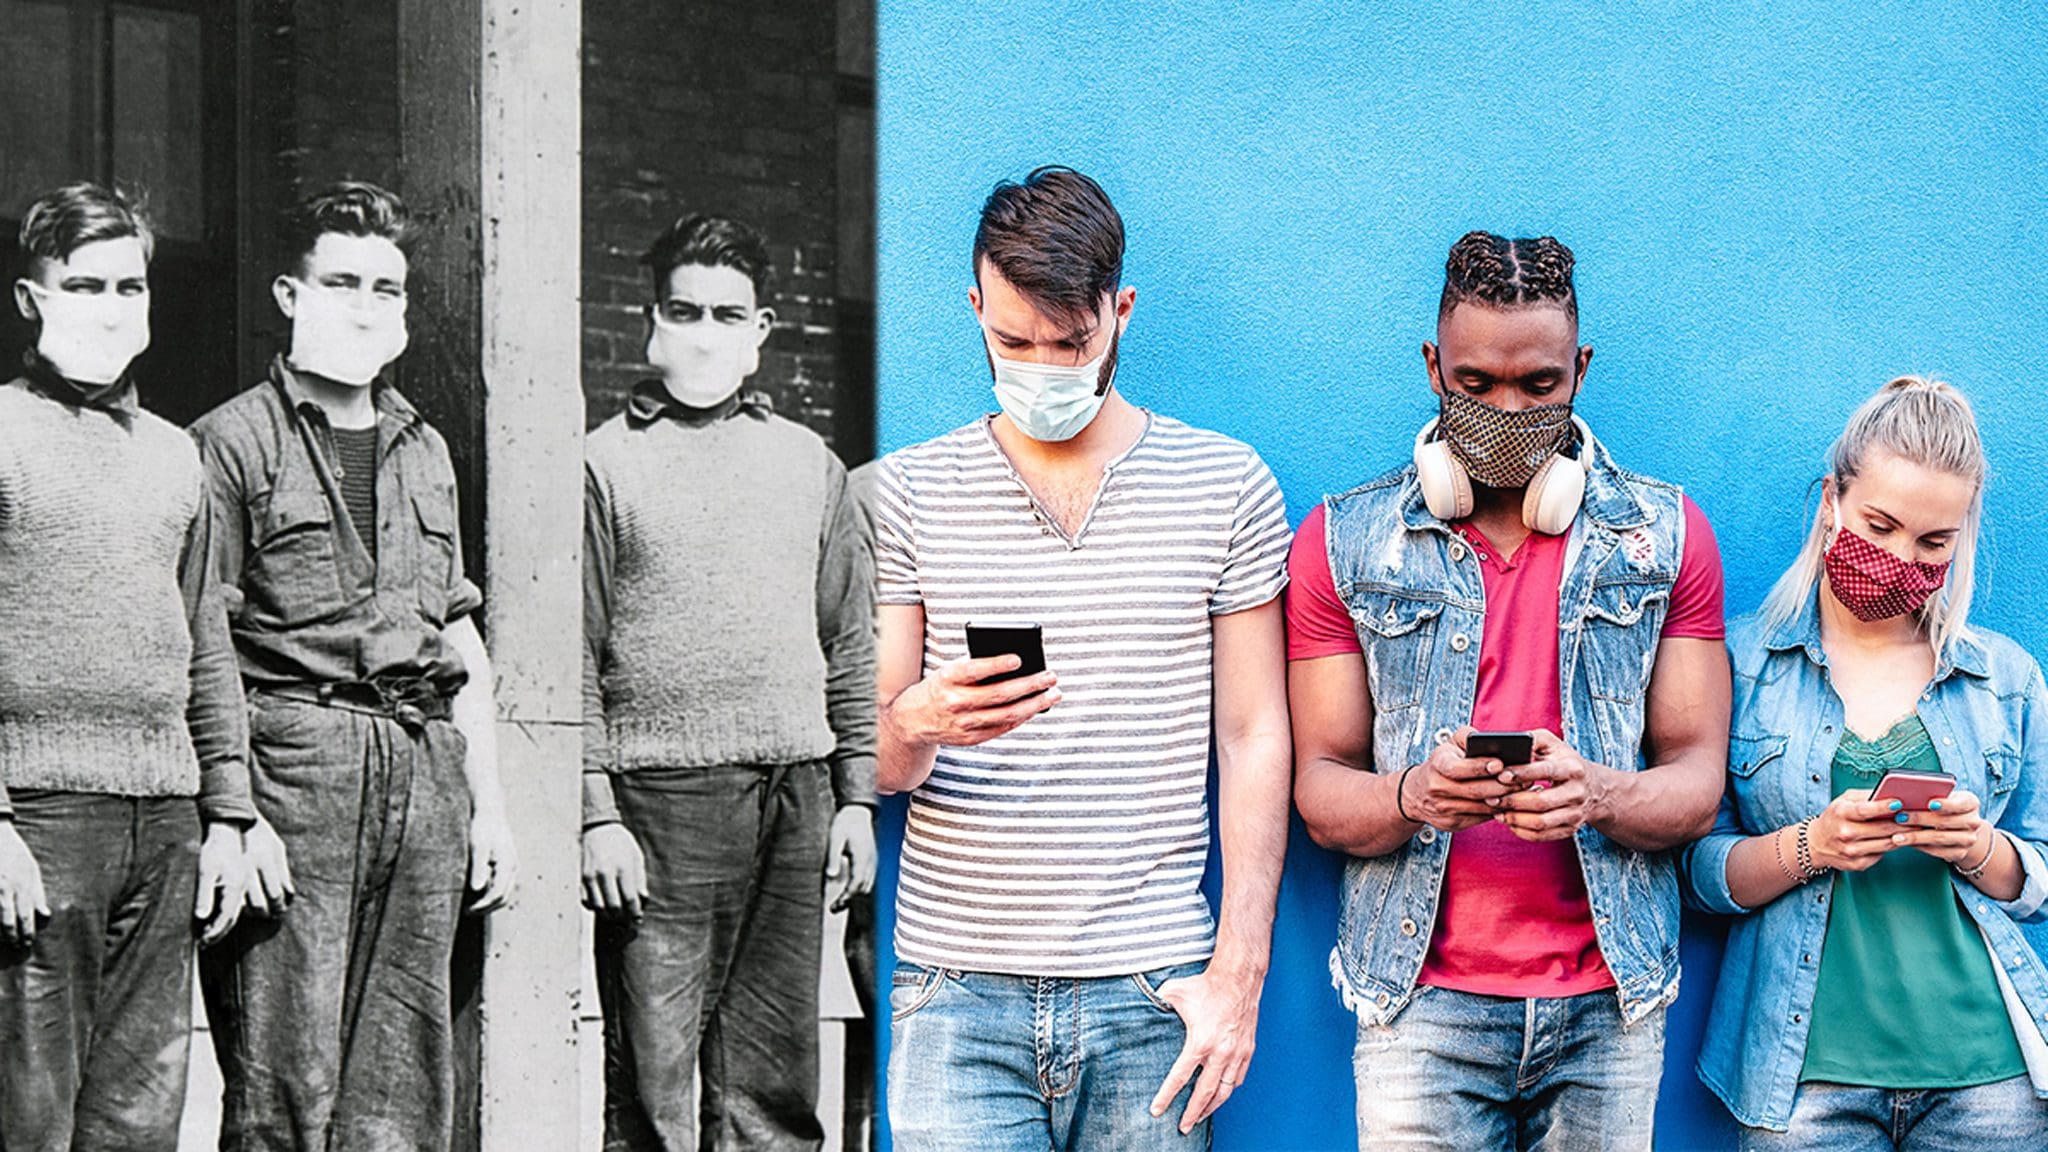 Side to side images to contrast time with the first image in black and white with three young men wearing masks and second image in color with two young men and one young woman wearing masks and on their phones